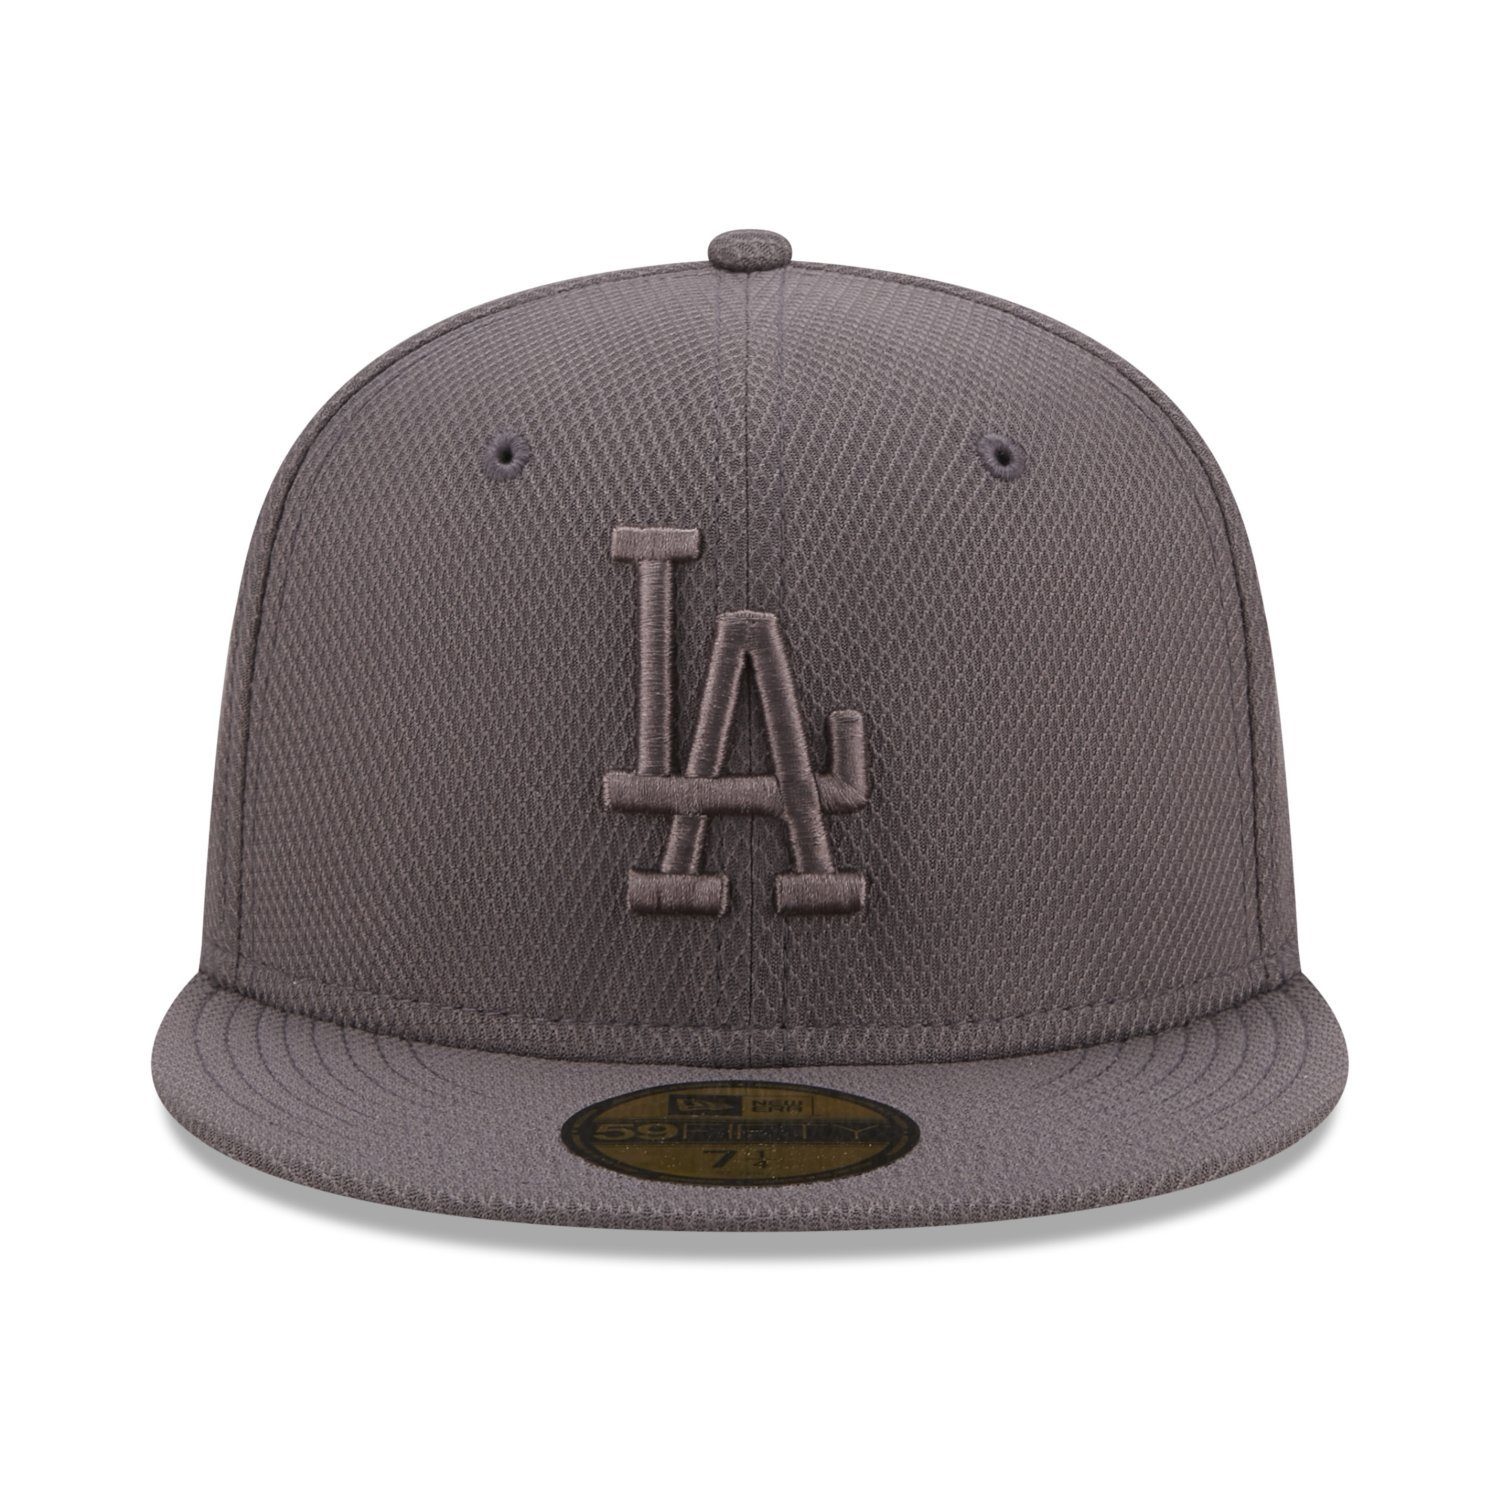 New Era Cap DIAMOND Angeles Los 59Fifty Fitted Dodgers